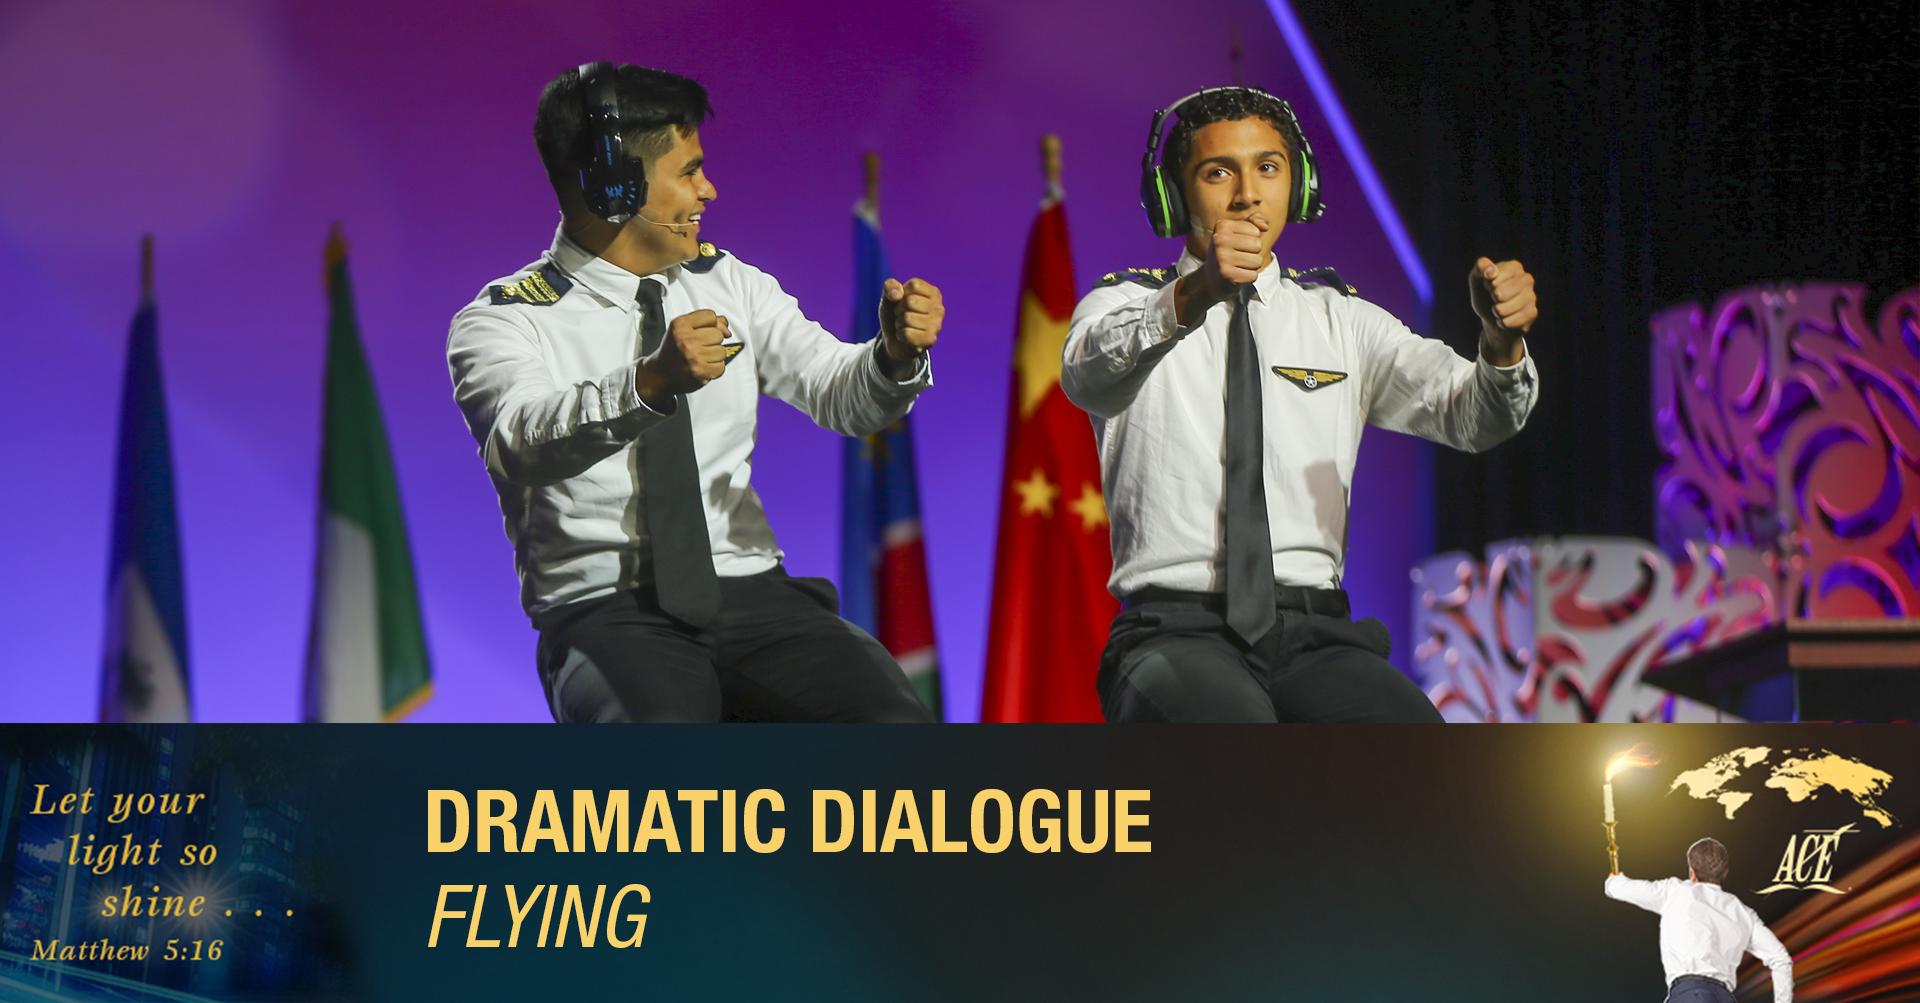 Dramatic Dialogue, "Flying" - ISC 2019